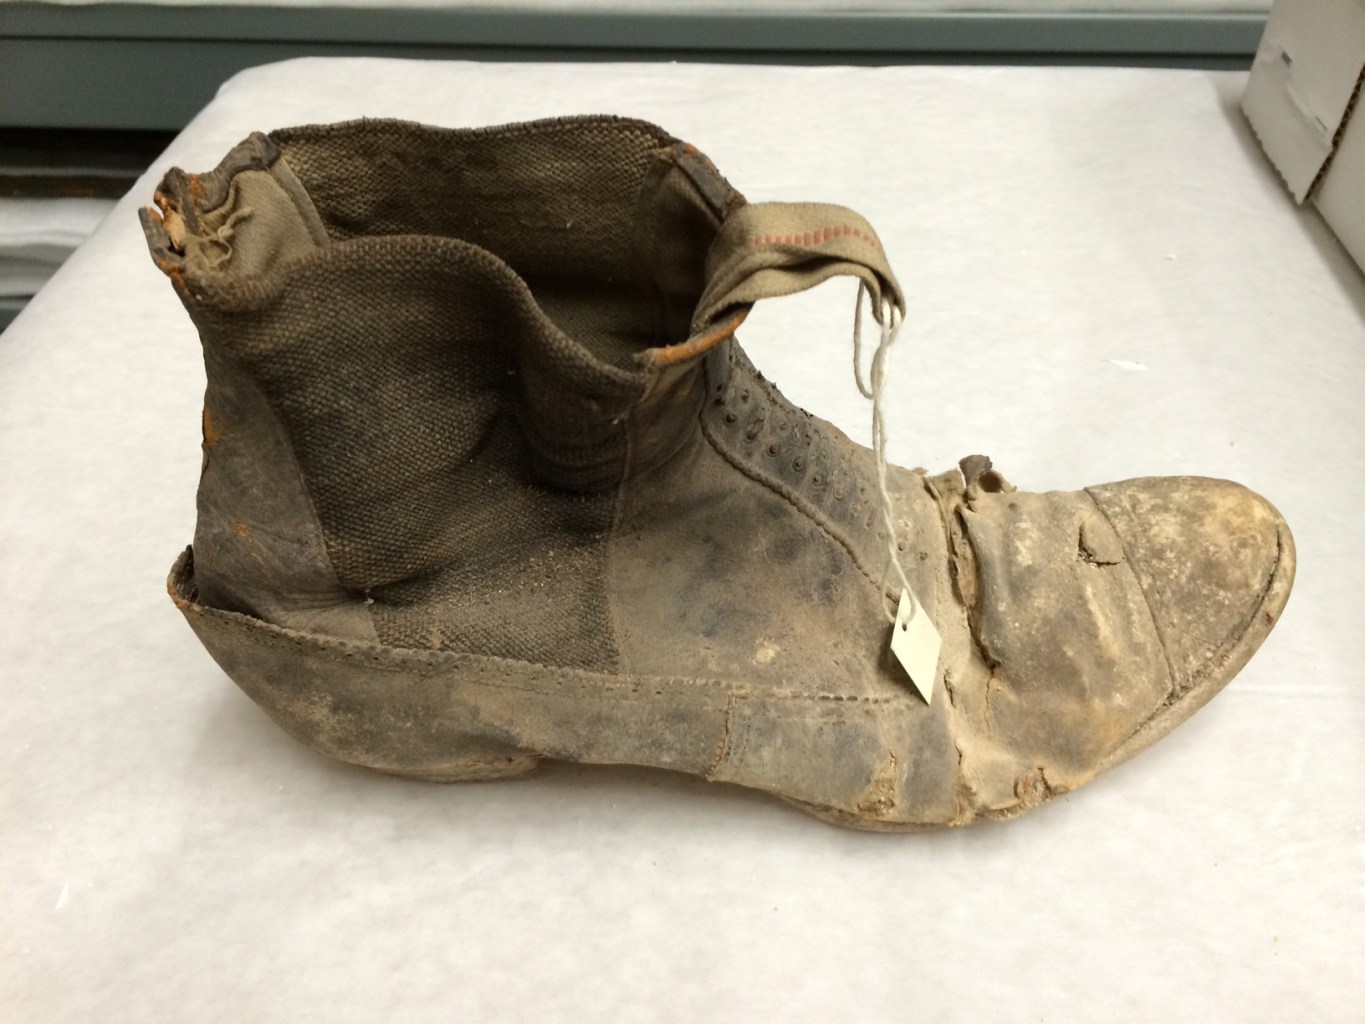 An old, decaying boot-style shoe.